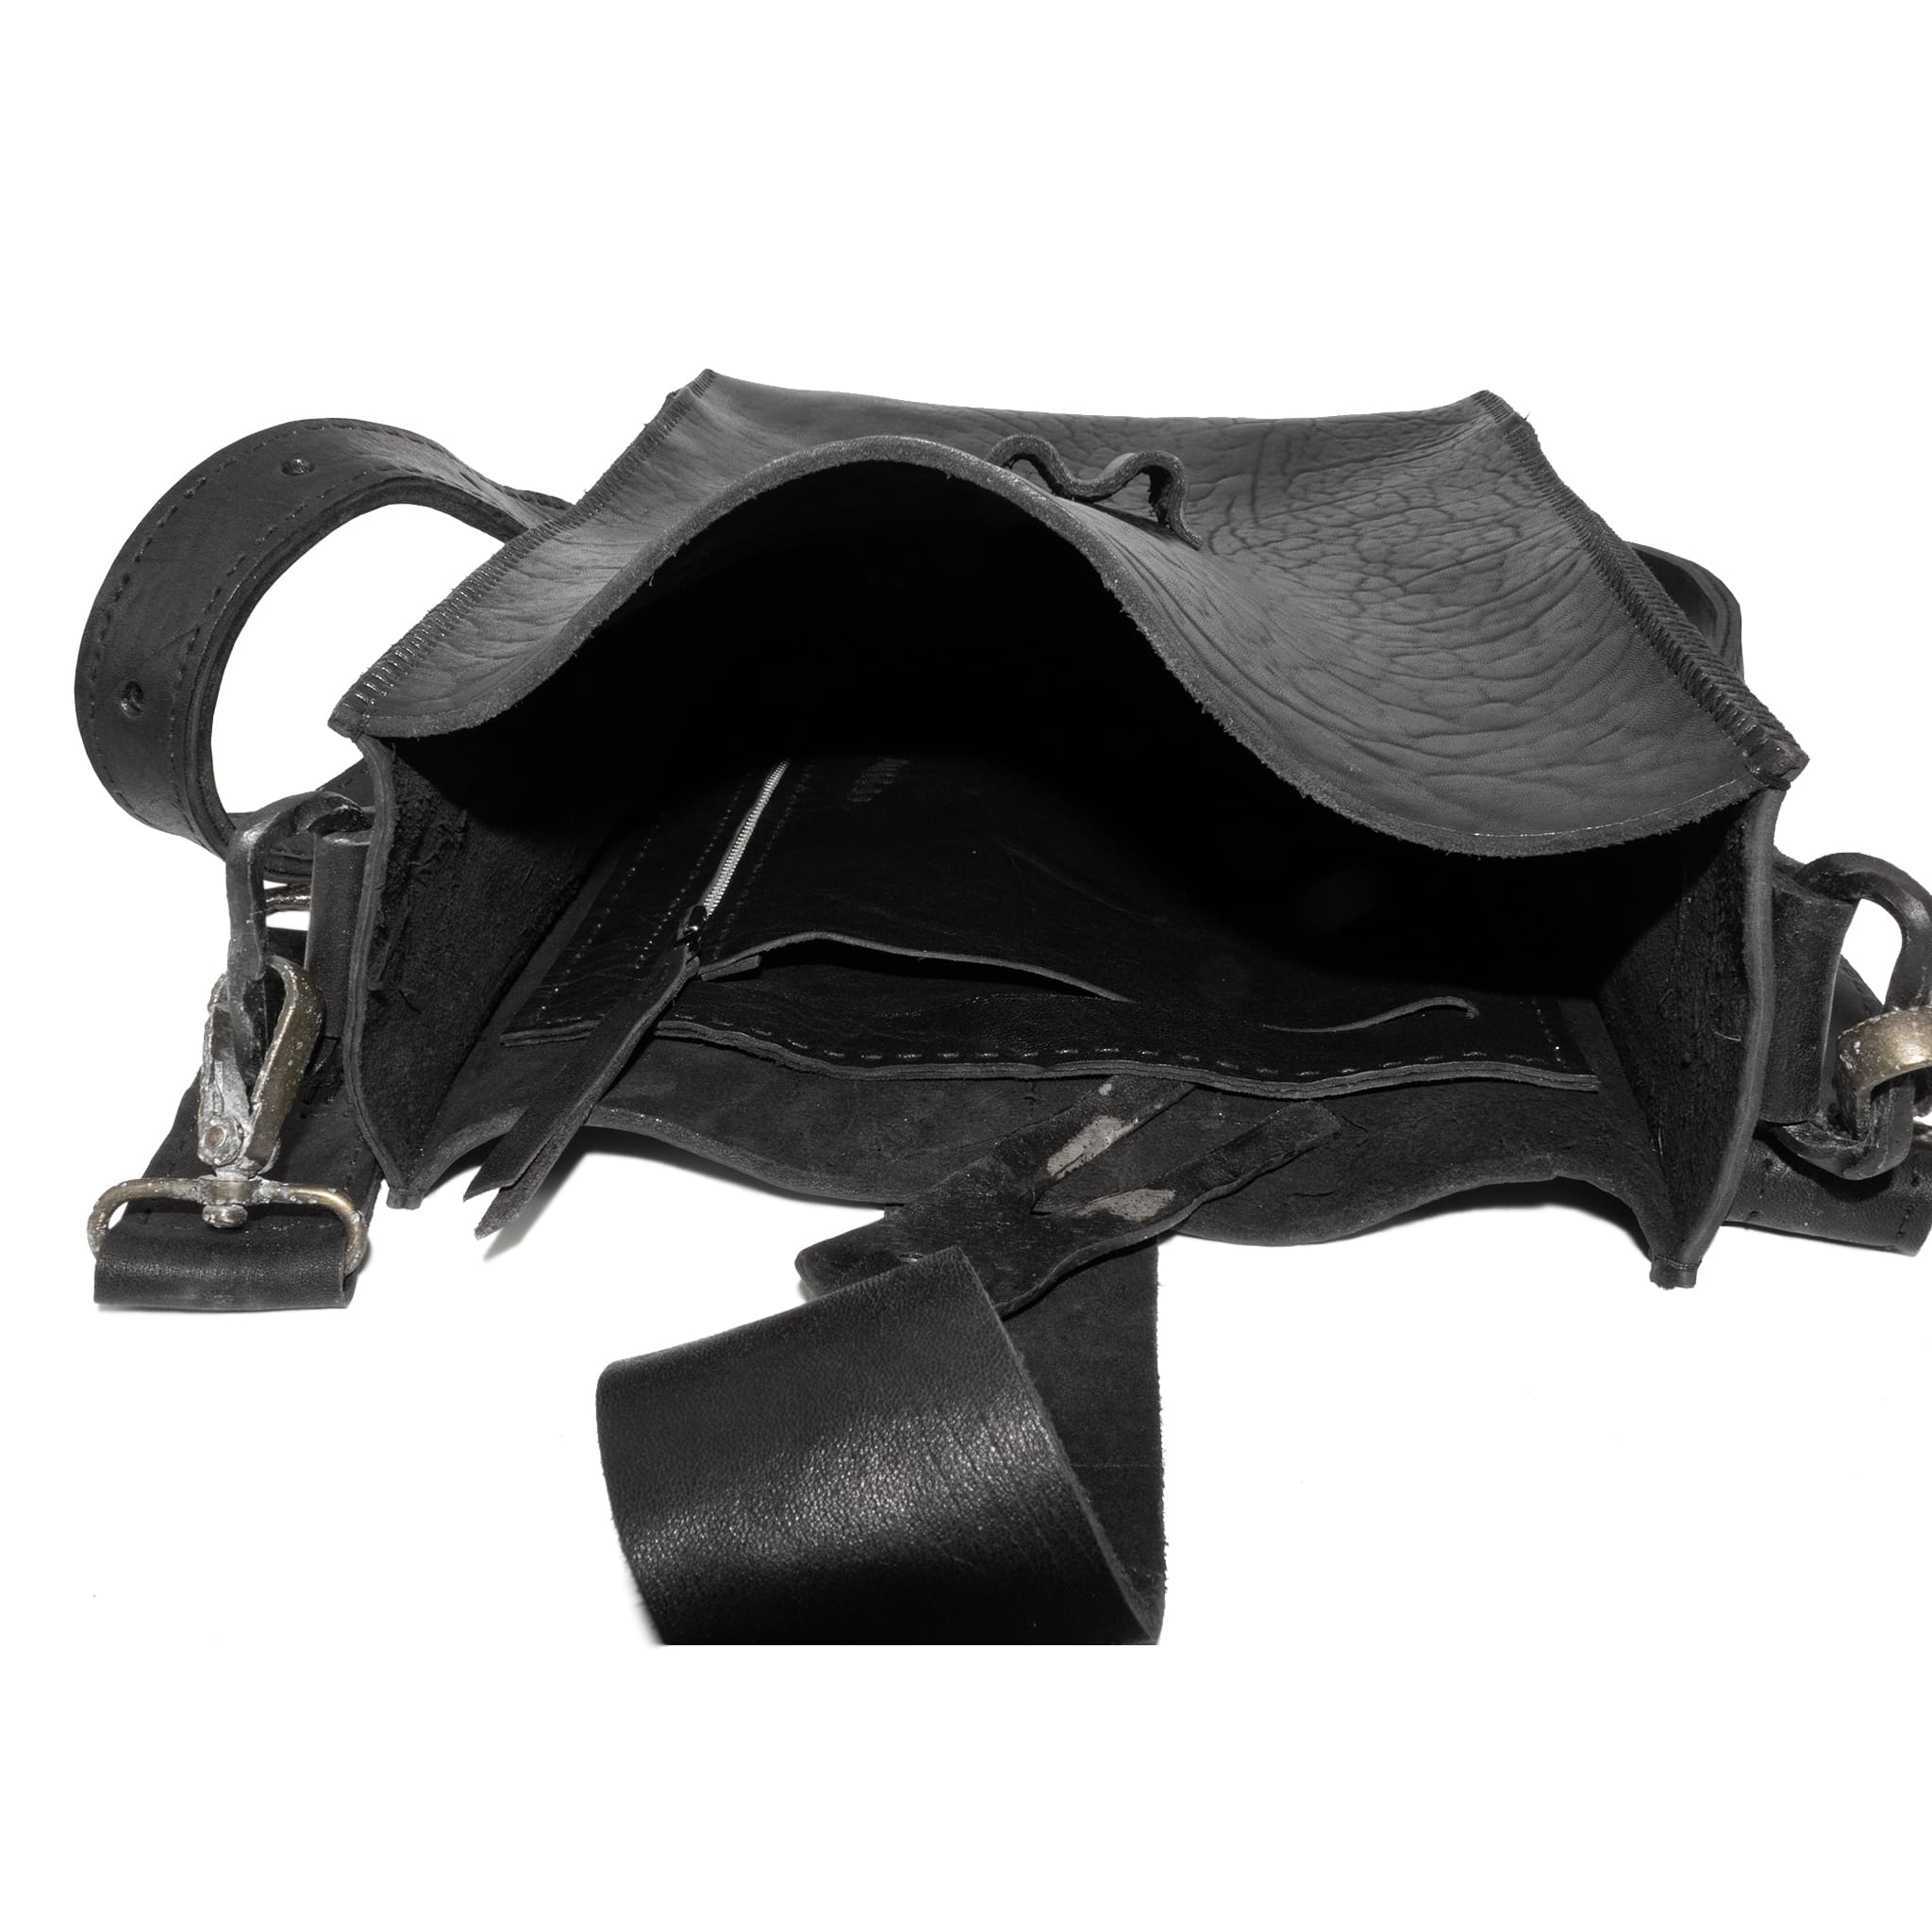 a multiple pocket matte black horse culatta leather shoulder bag with a detachable strap and custom hand forged iron hardware from independent designer atelier SKN.